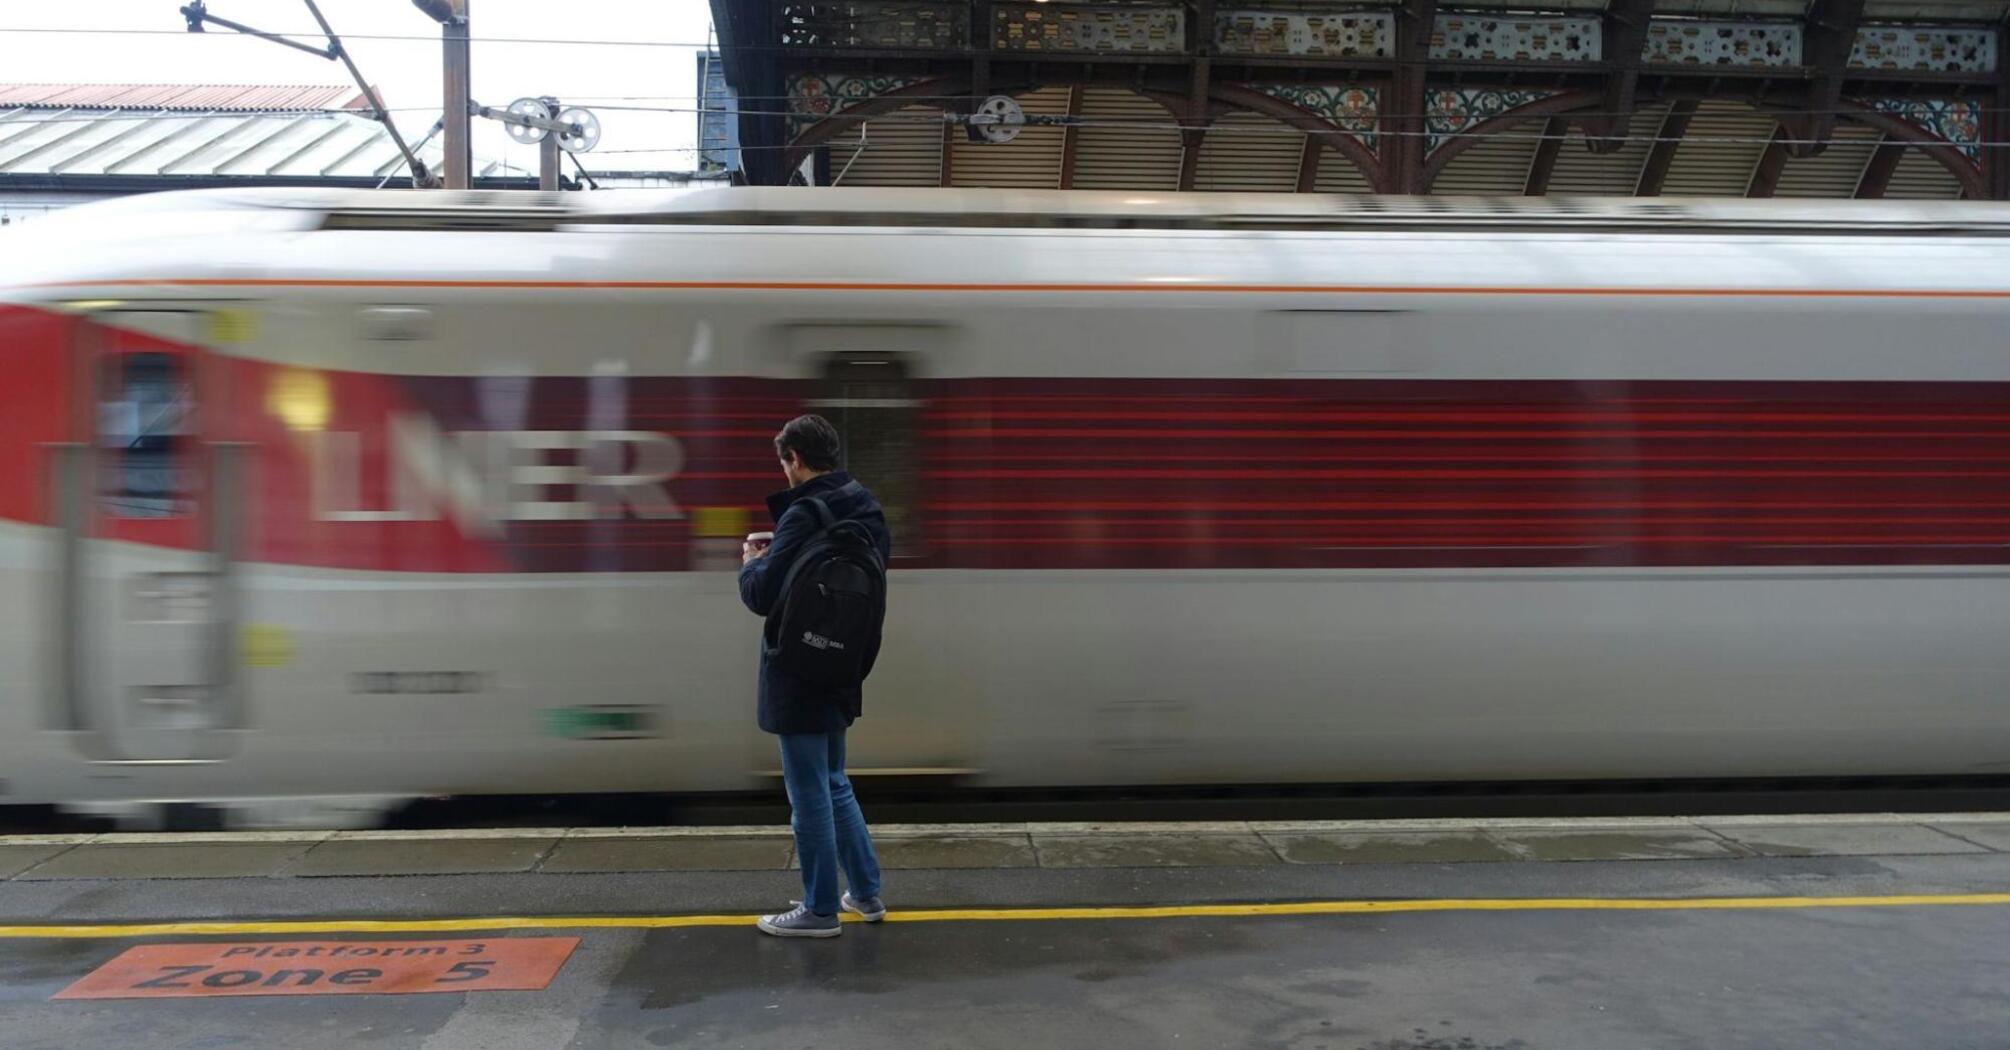 A person stands on a train platform as an LNER train passes by at high speed